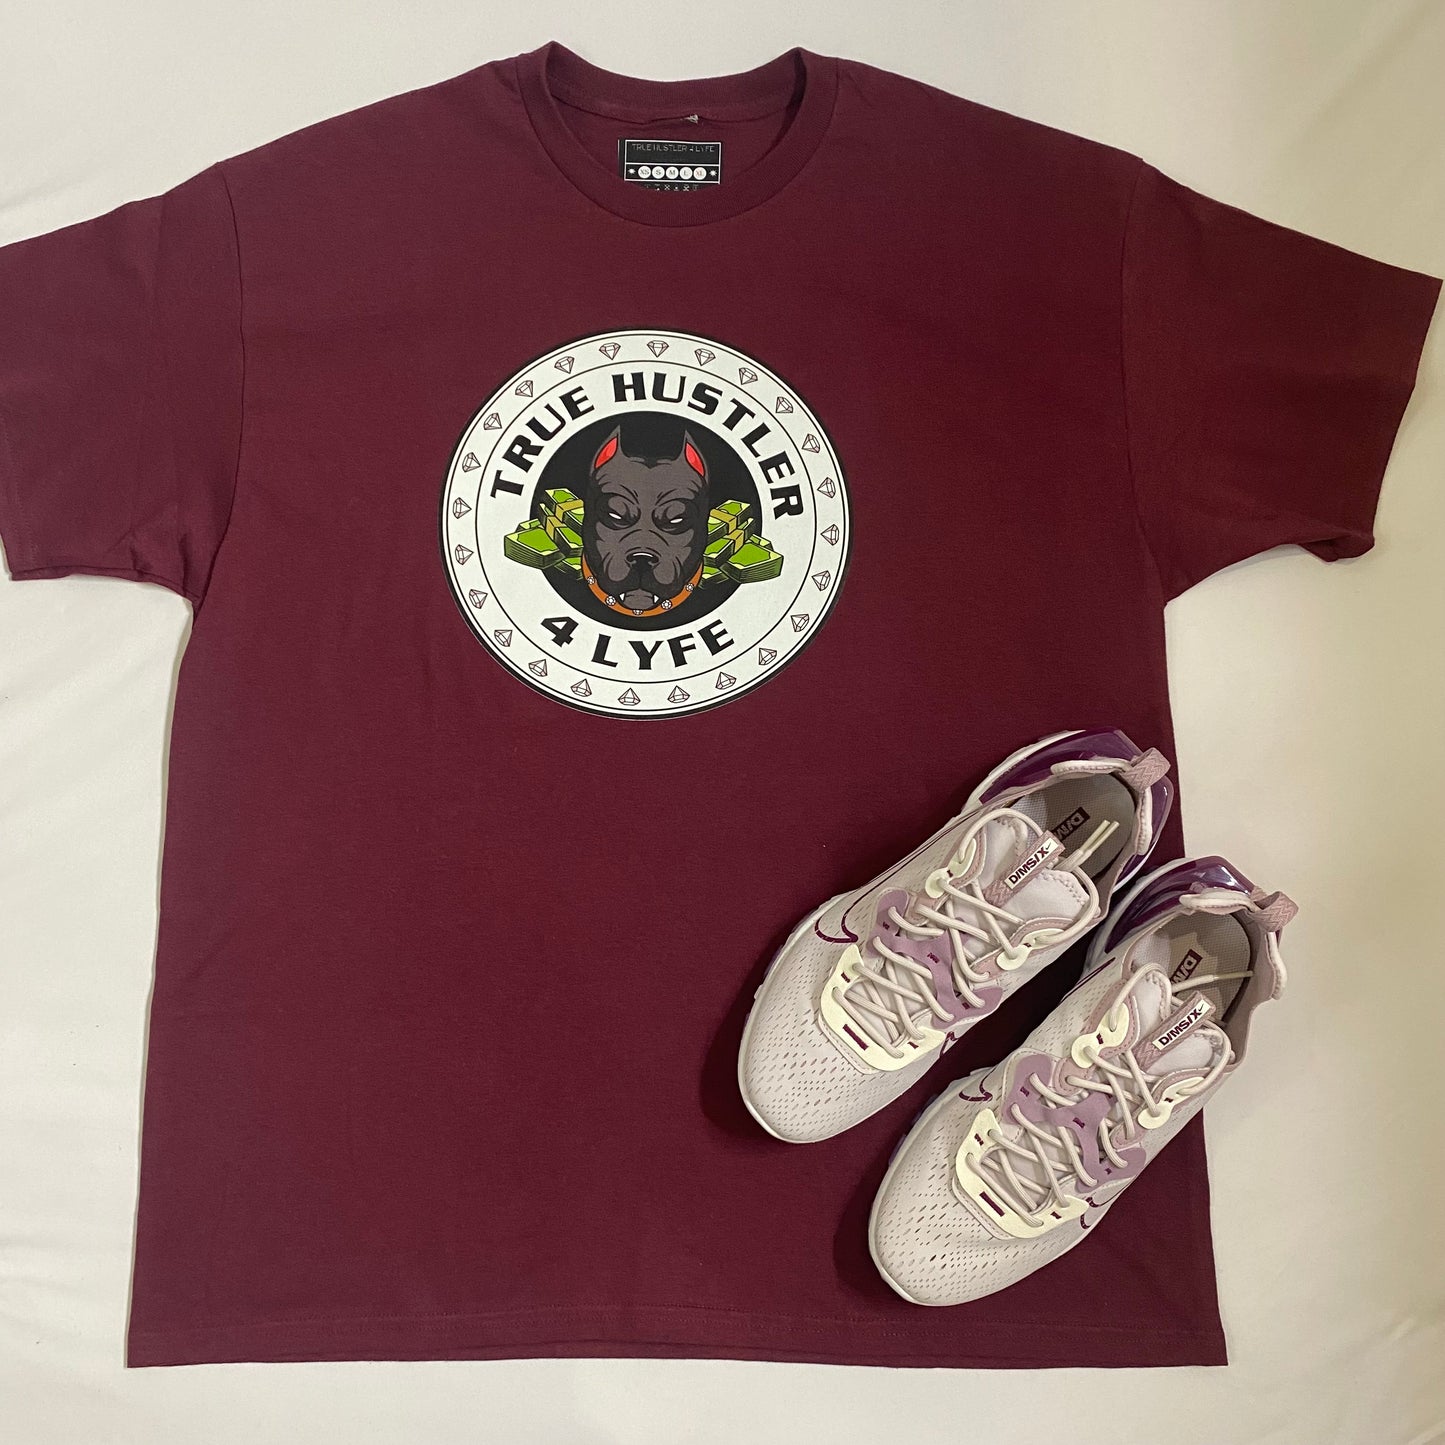 TH4L Grind Collection Unisex Graphic Tees - Burgundy Heavy Duty Cotton T-Shirt and White Grind Logo Tee